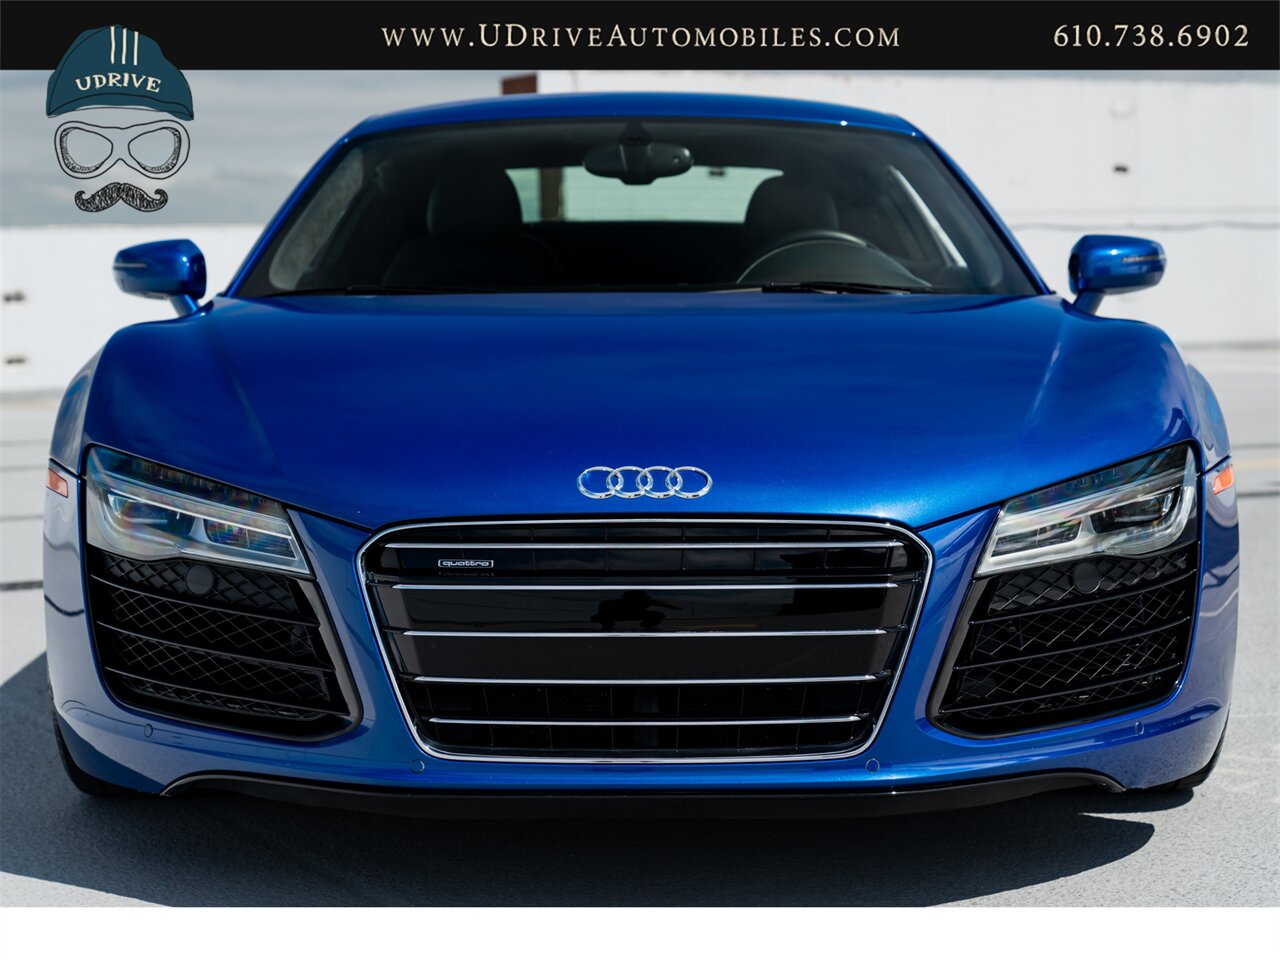 2015 Audi R8 5.2 V10 Quattro 6 Speed Manual 10k Miles  Diamond Stitched Leather 1 of 2 - Photo 12 - West Chester, PA 19382